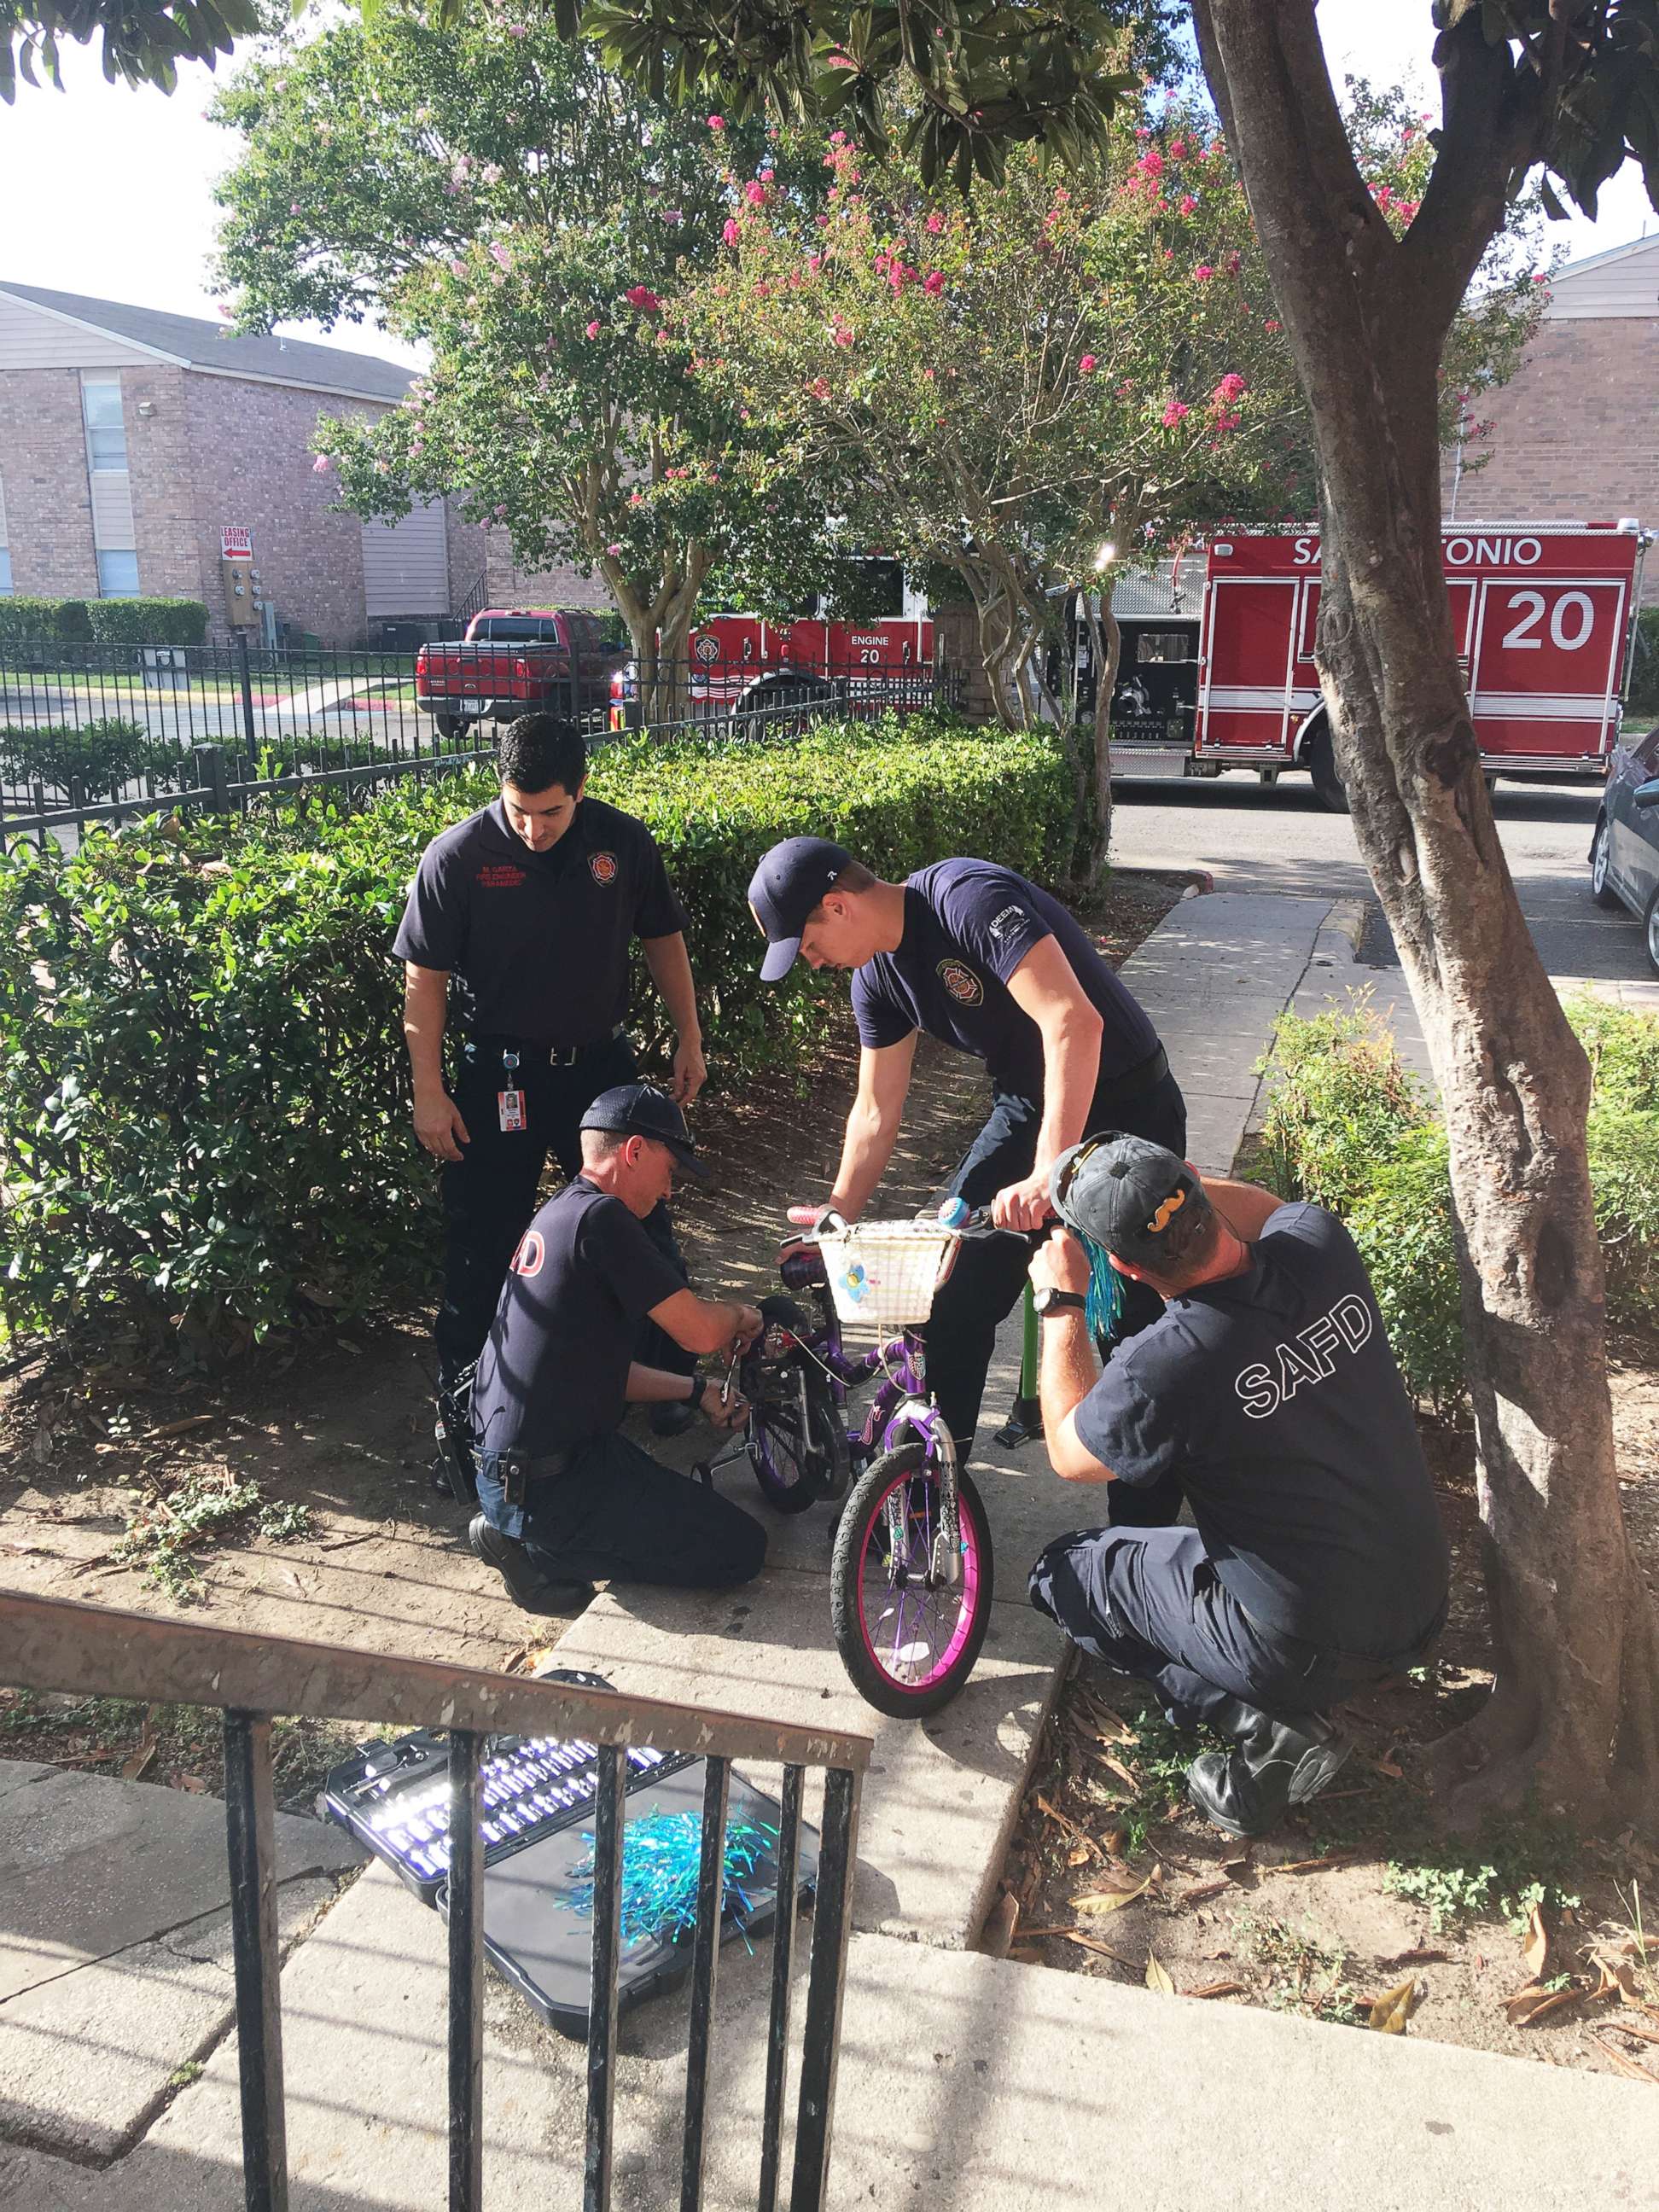 PHOTO: The San Antonio Fire Department surprised Hope Rhoades, 3, with a bike and safety gear after realizing her family couldn't afford one.